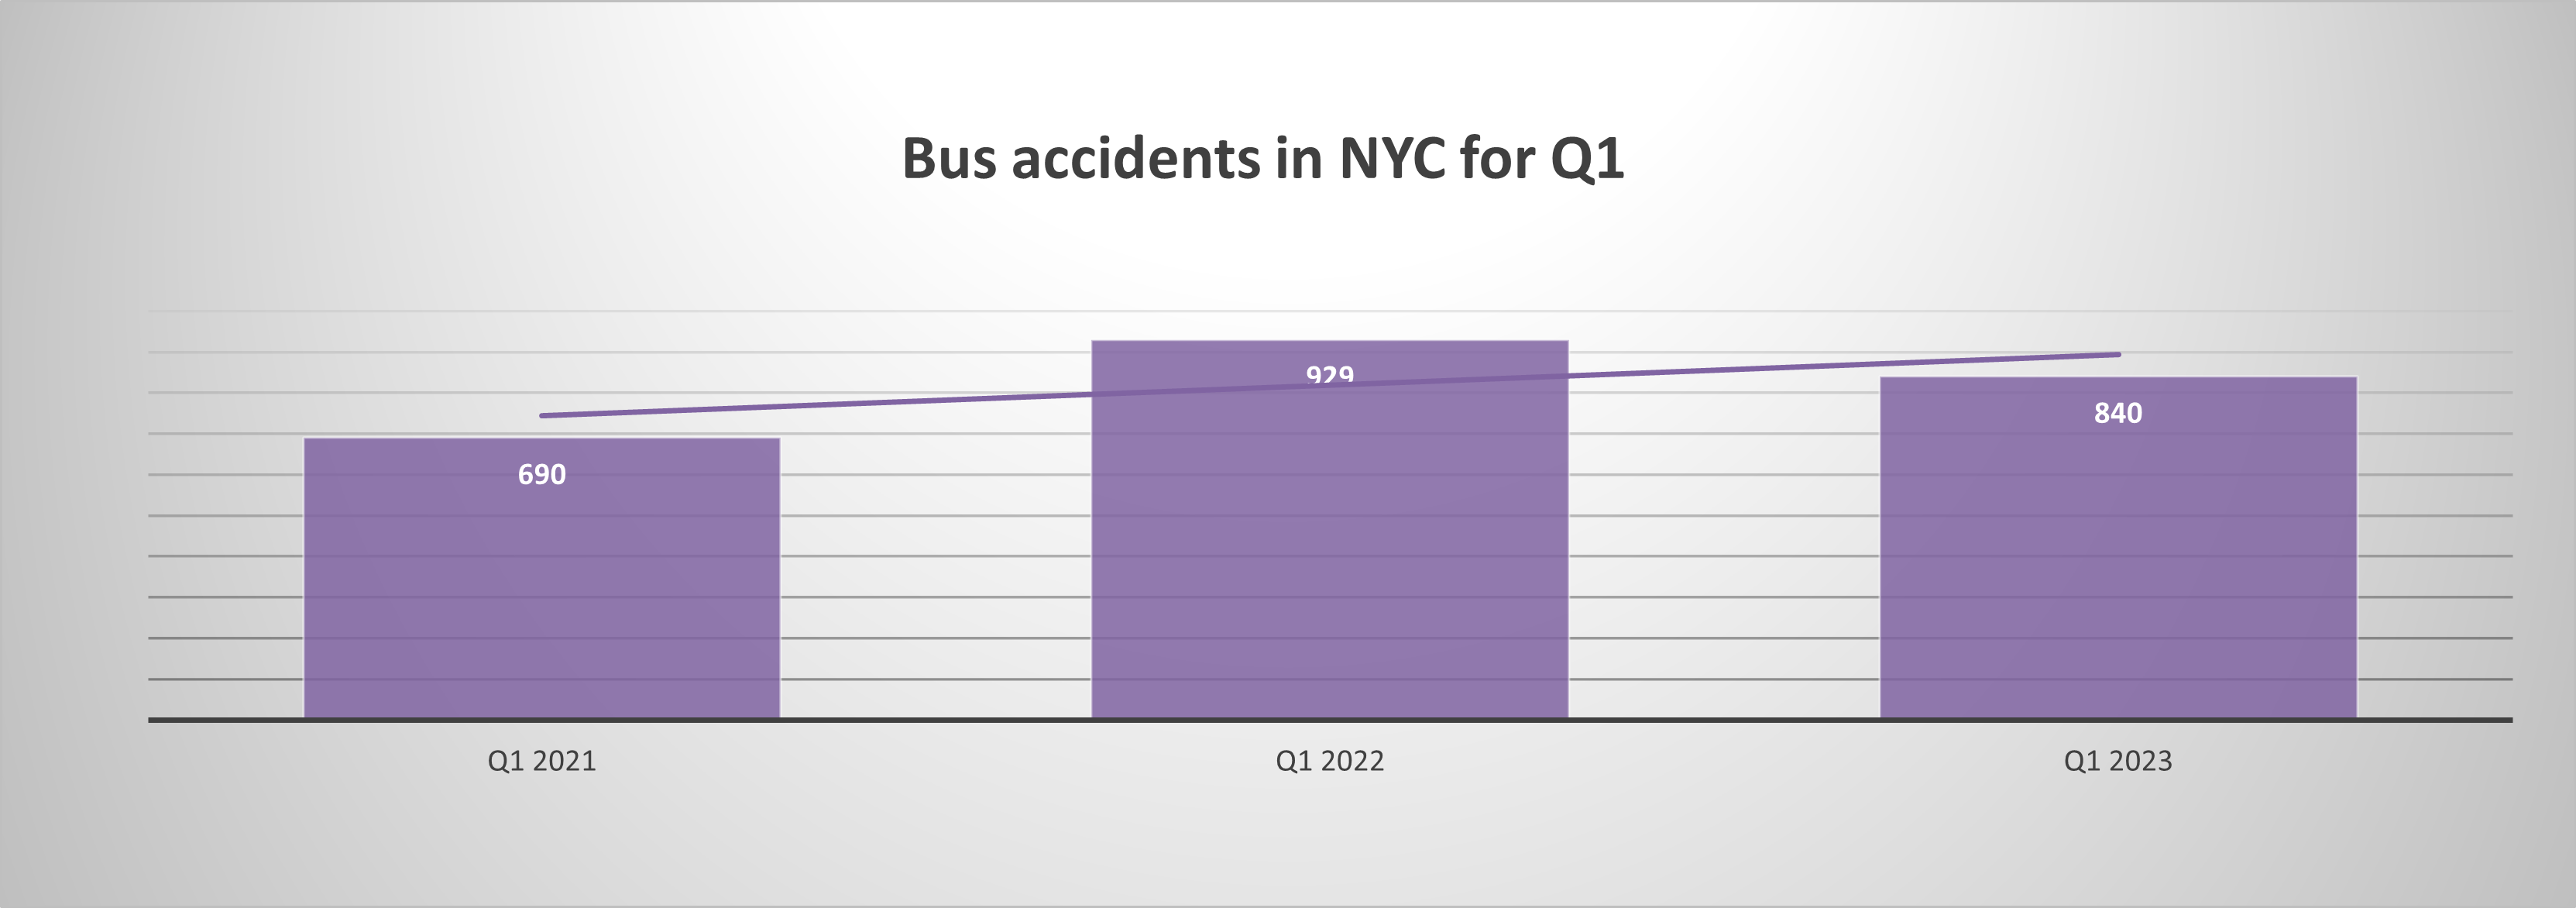 Bus accidents NYC Q1 2023